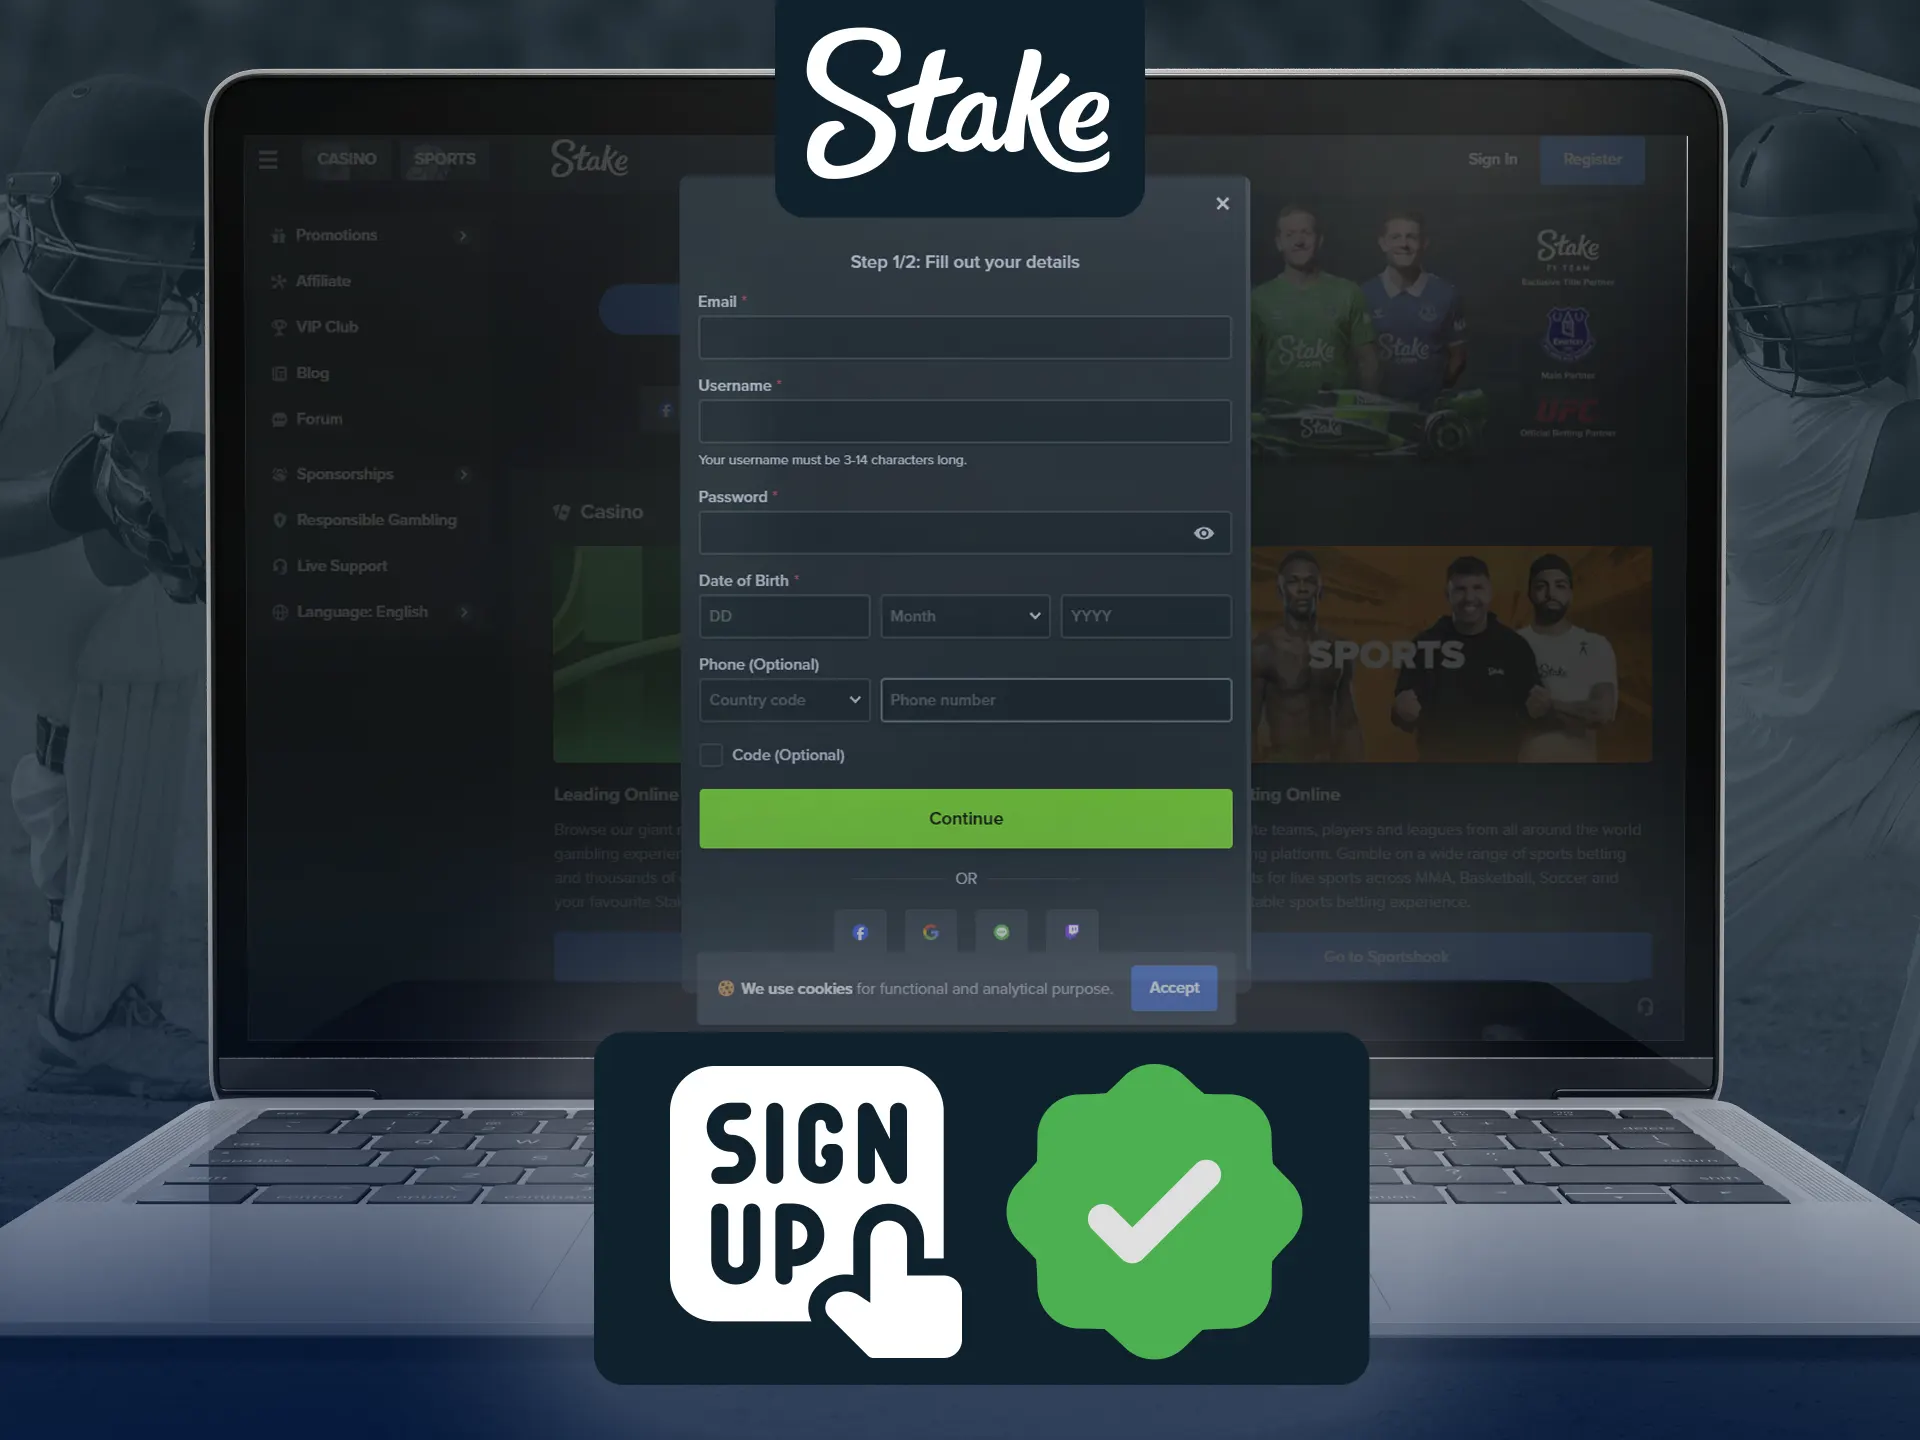 Stake requires registration and verification for full access.